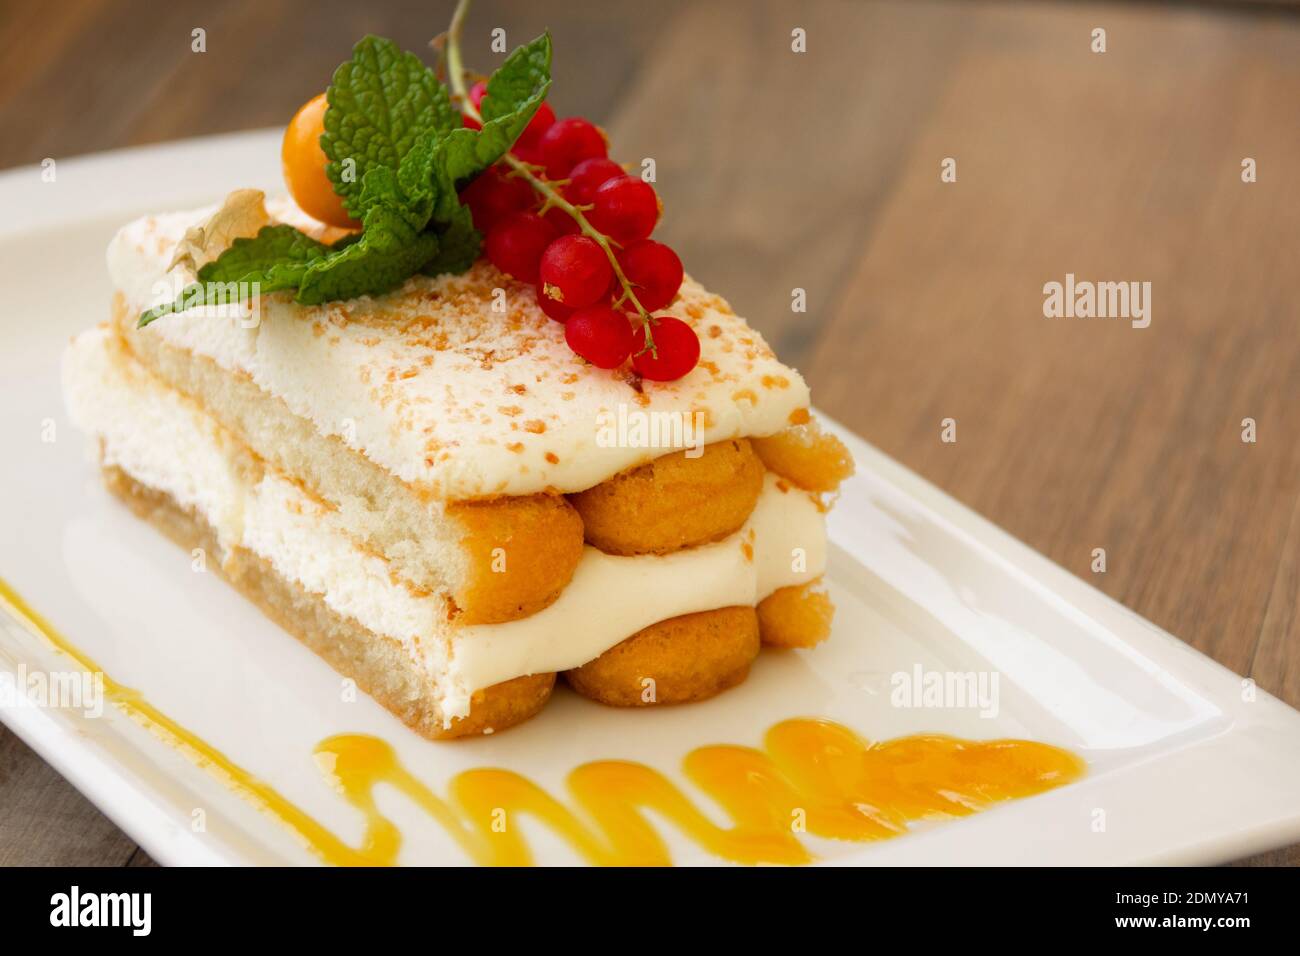 Succulent lady fingers cake with cream, red berries and glazed on top of white plate with peach jam decoration. Sweet dessert, gourmet presentation Stock Photo